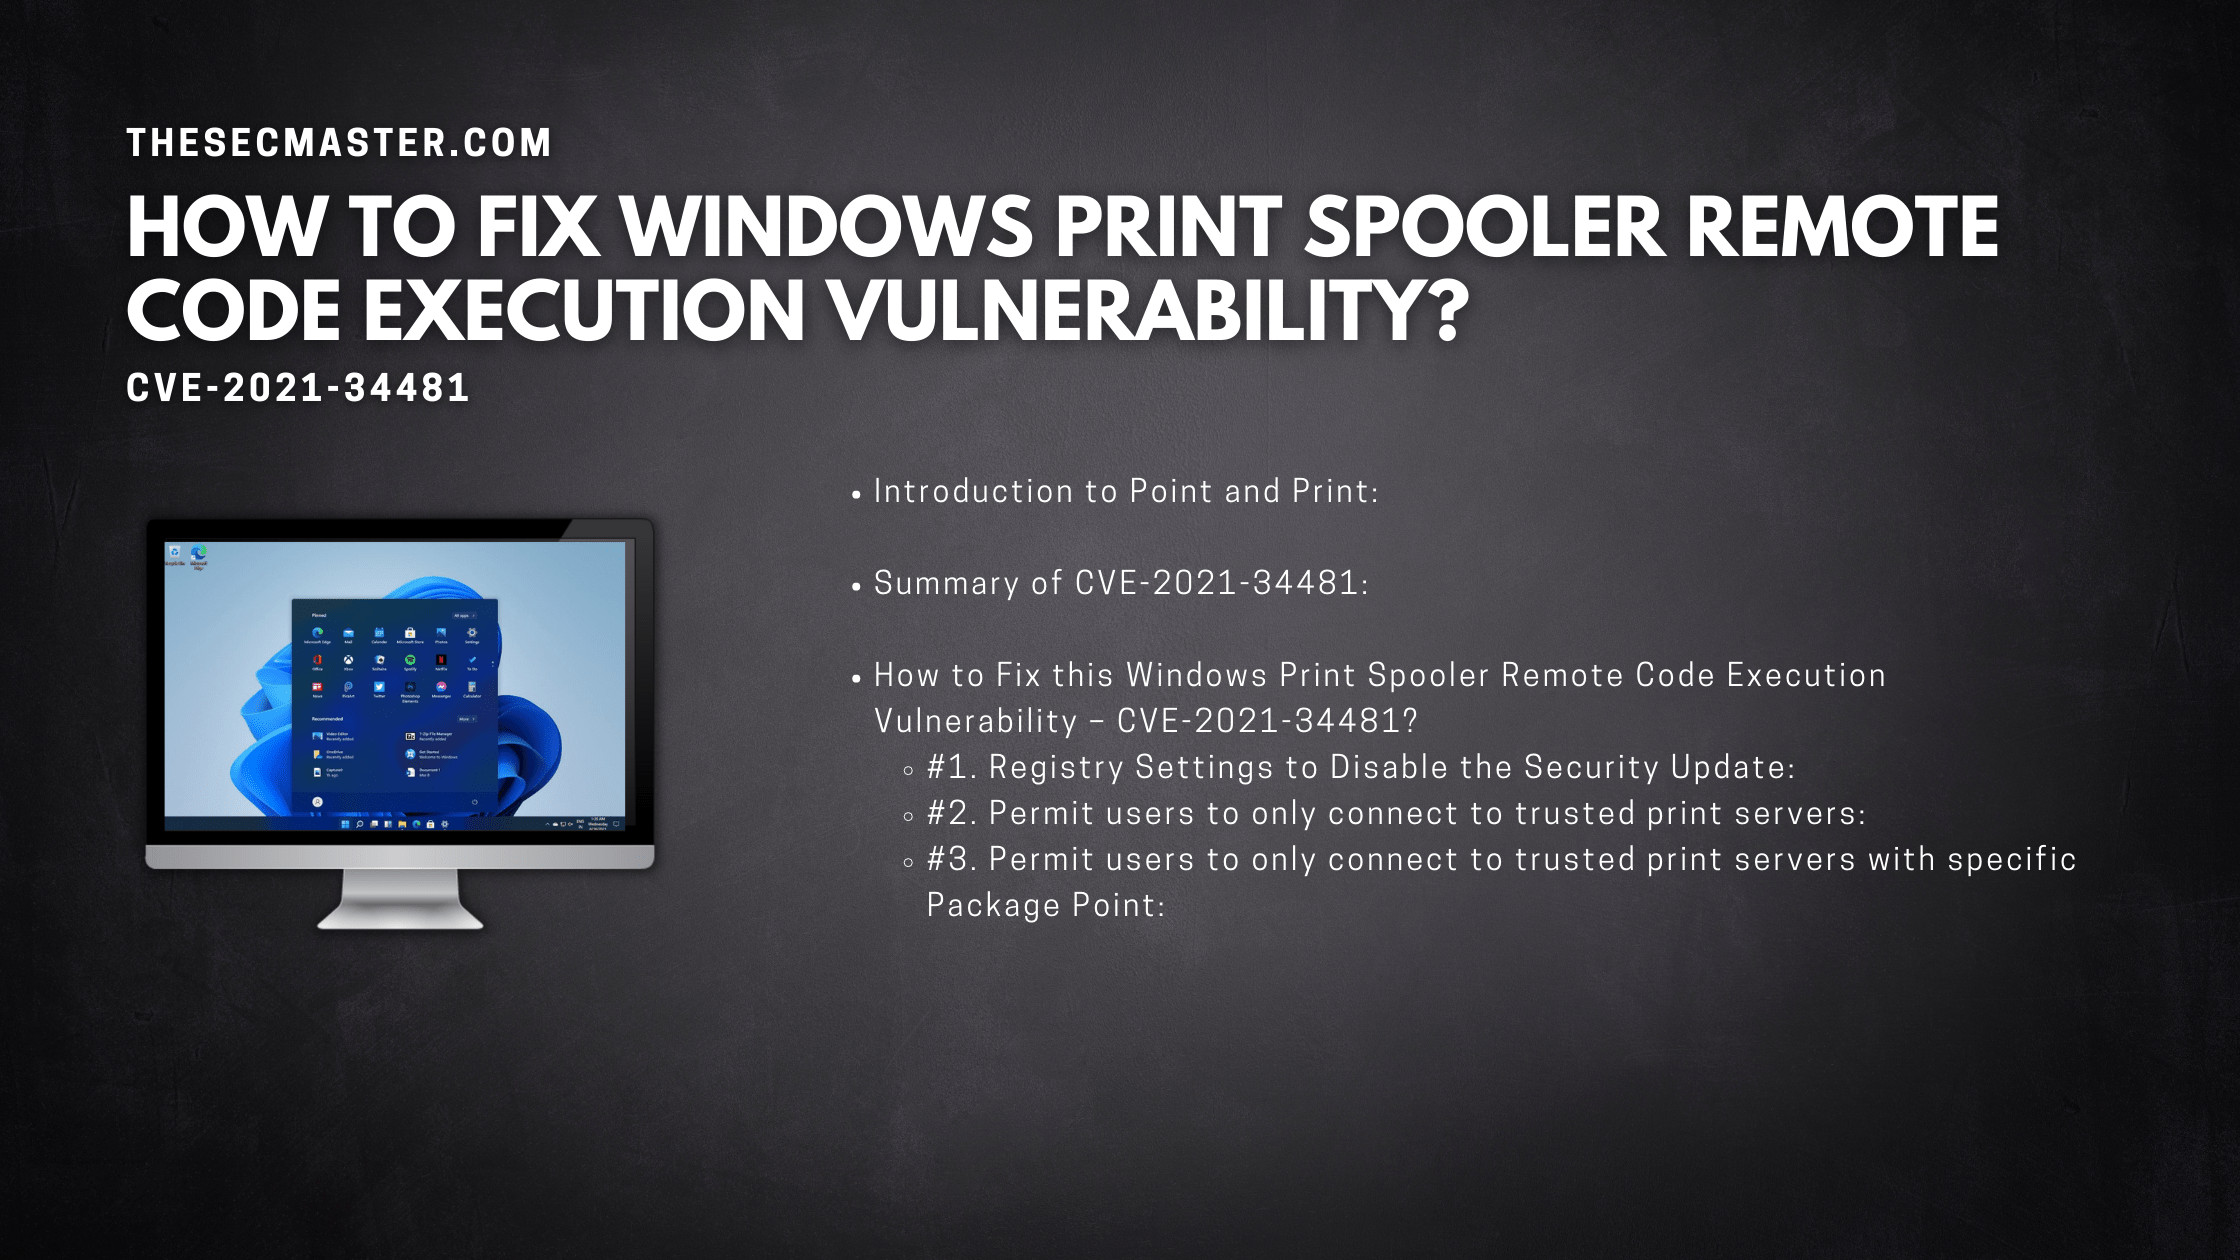 How To Fix Windows Print Spooler Remote Code Execution Vulnerability